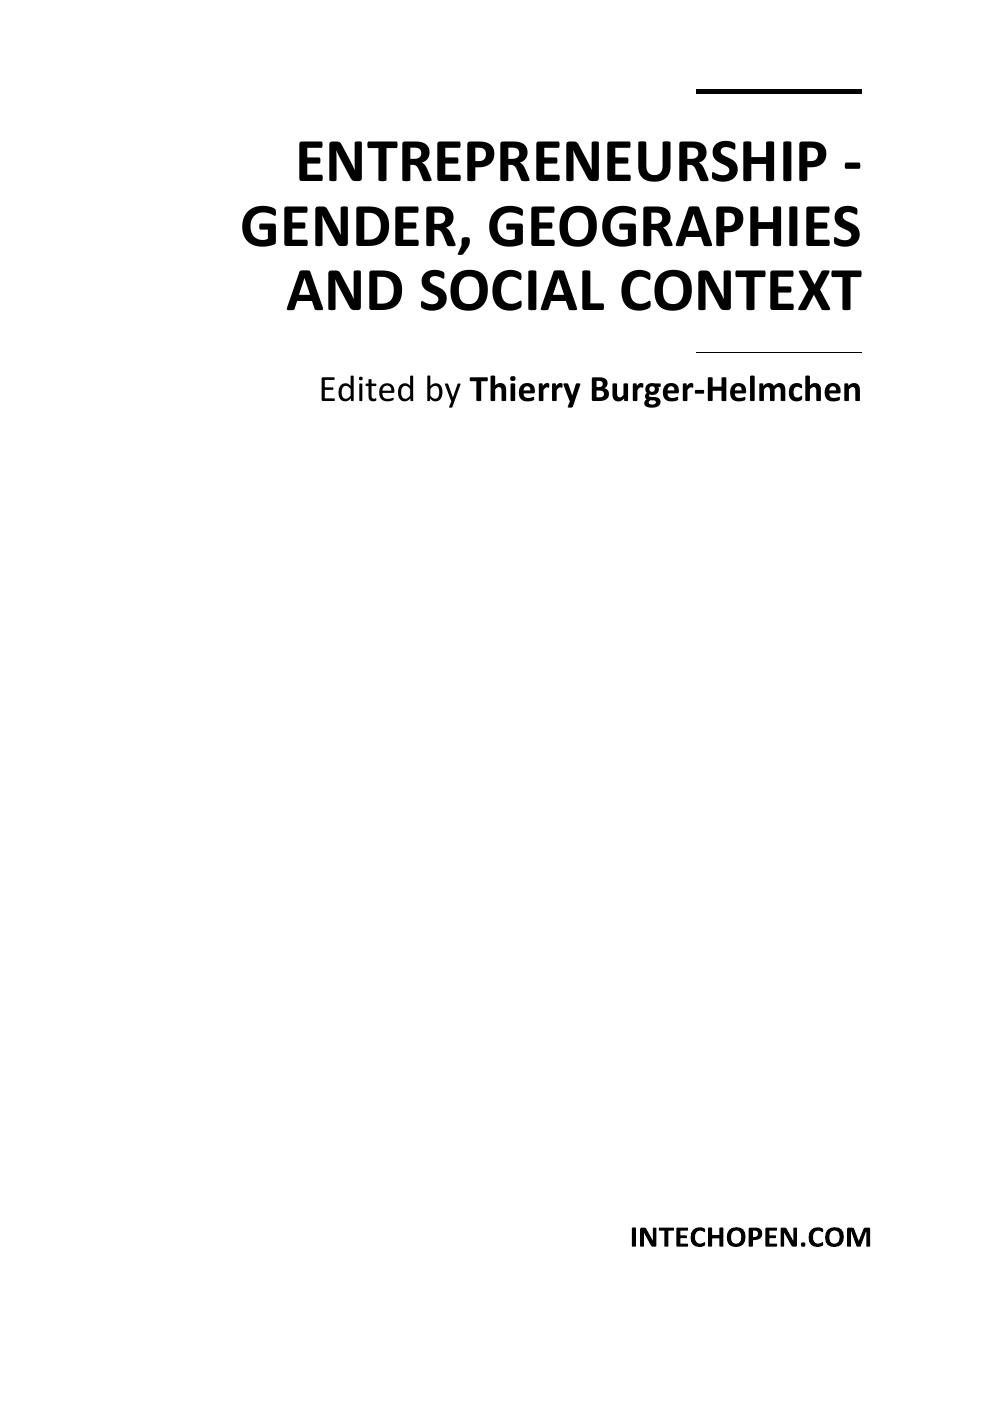 Microsoft Word - 00 preface_ Entrepreneurship - Gender, Geographies and Social Context